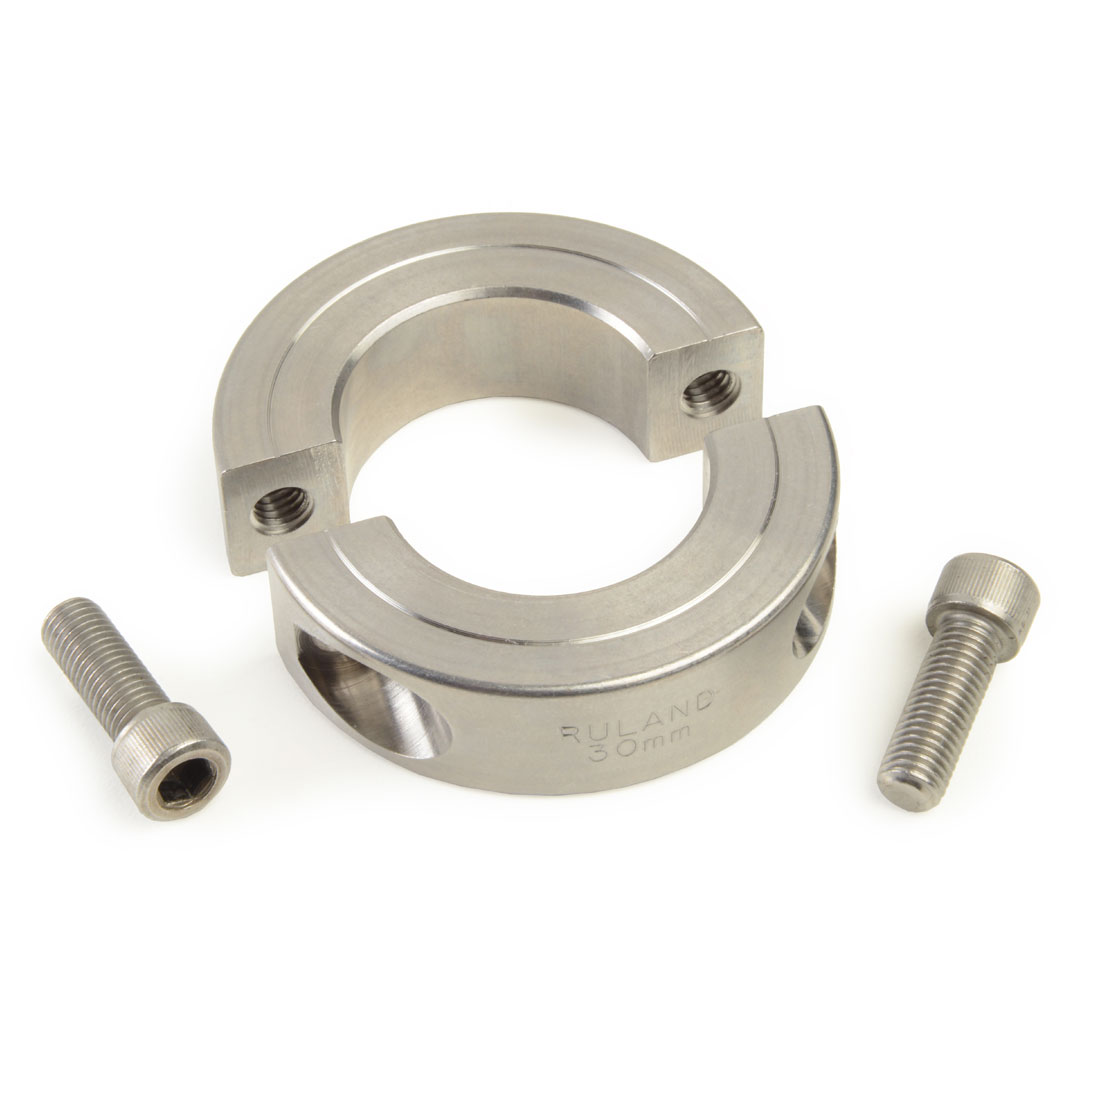 Ruland Manufacturing Msp-8-f Shaft Collar Clamp 2pc 8mm Steel for sale online 